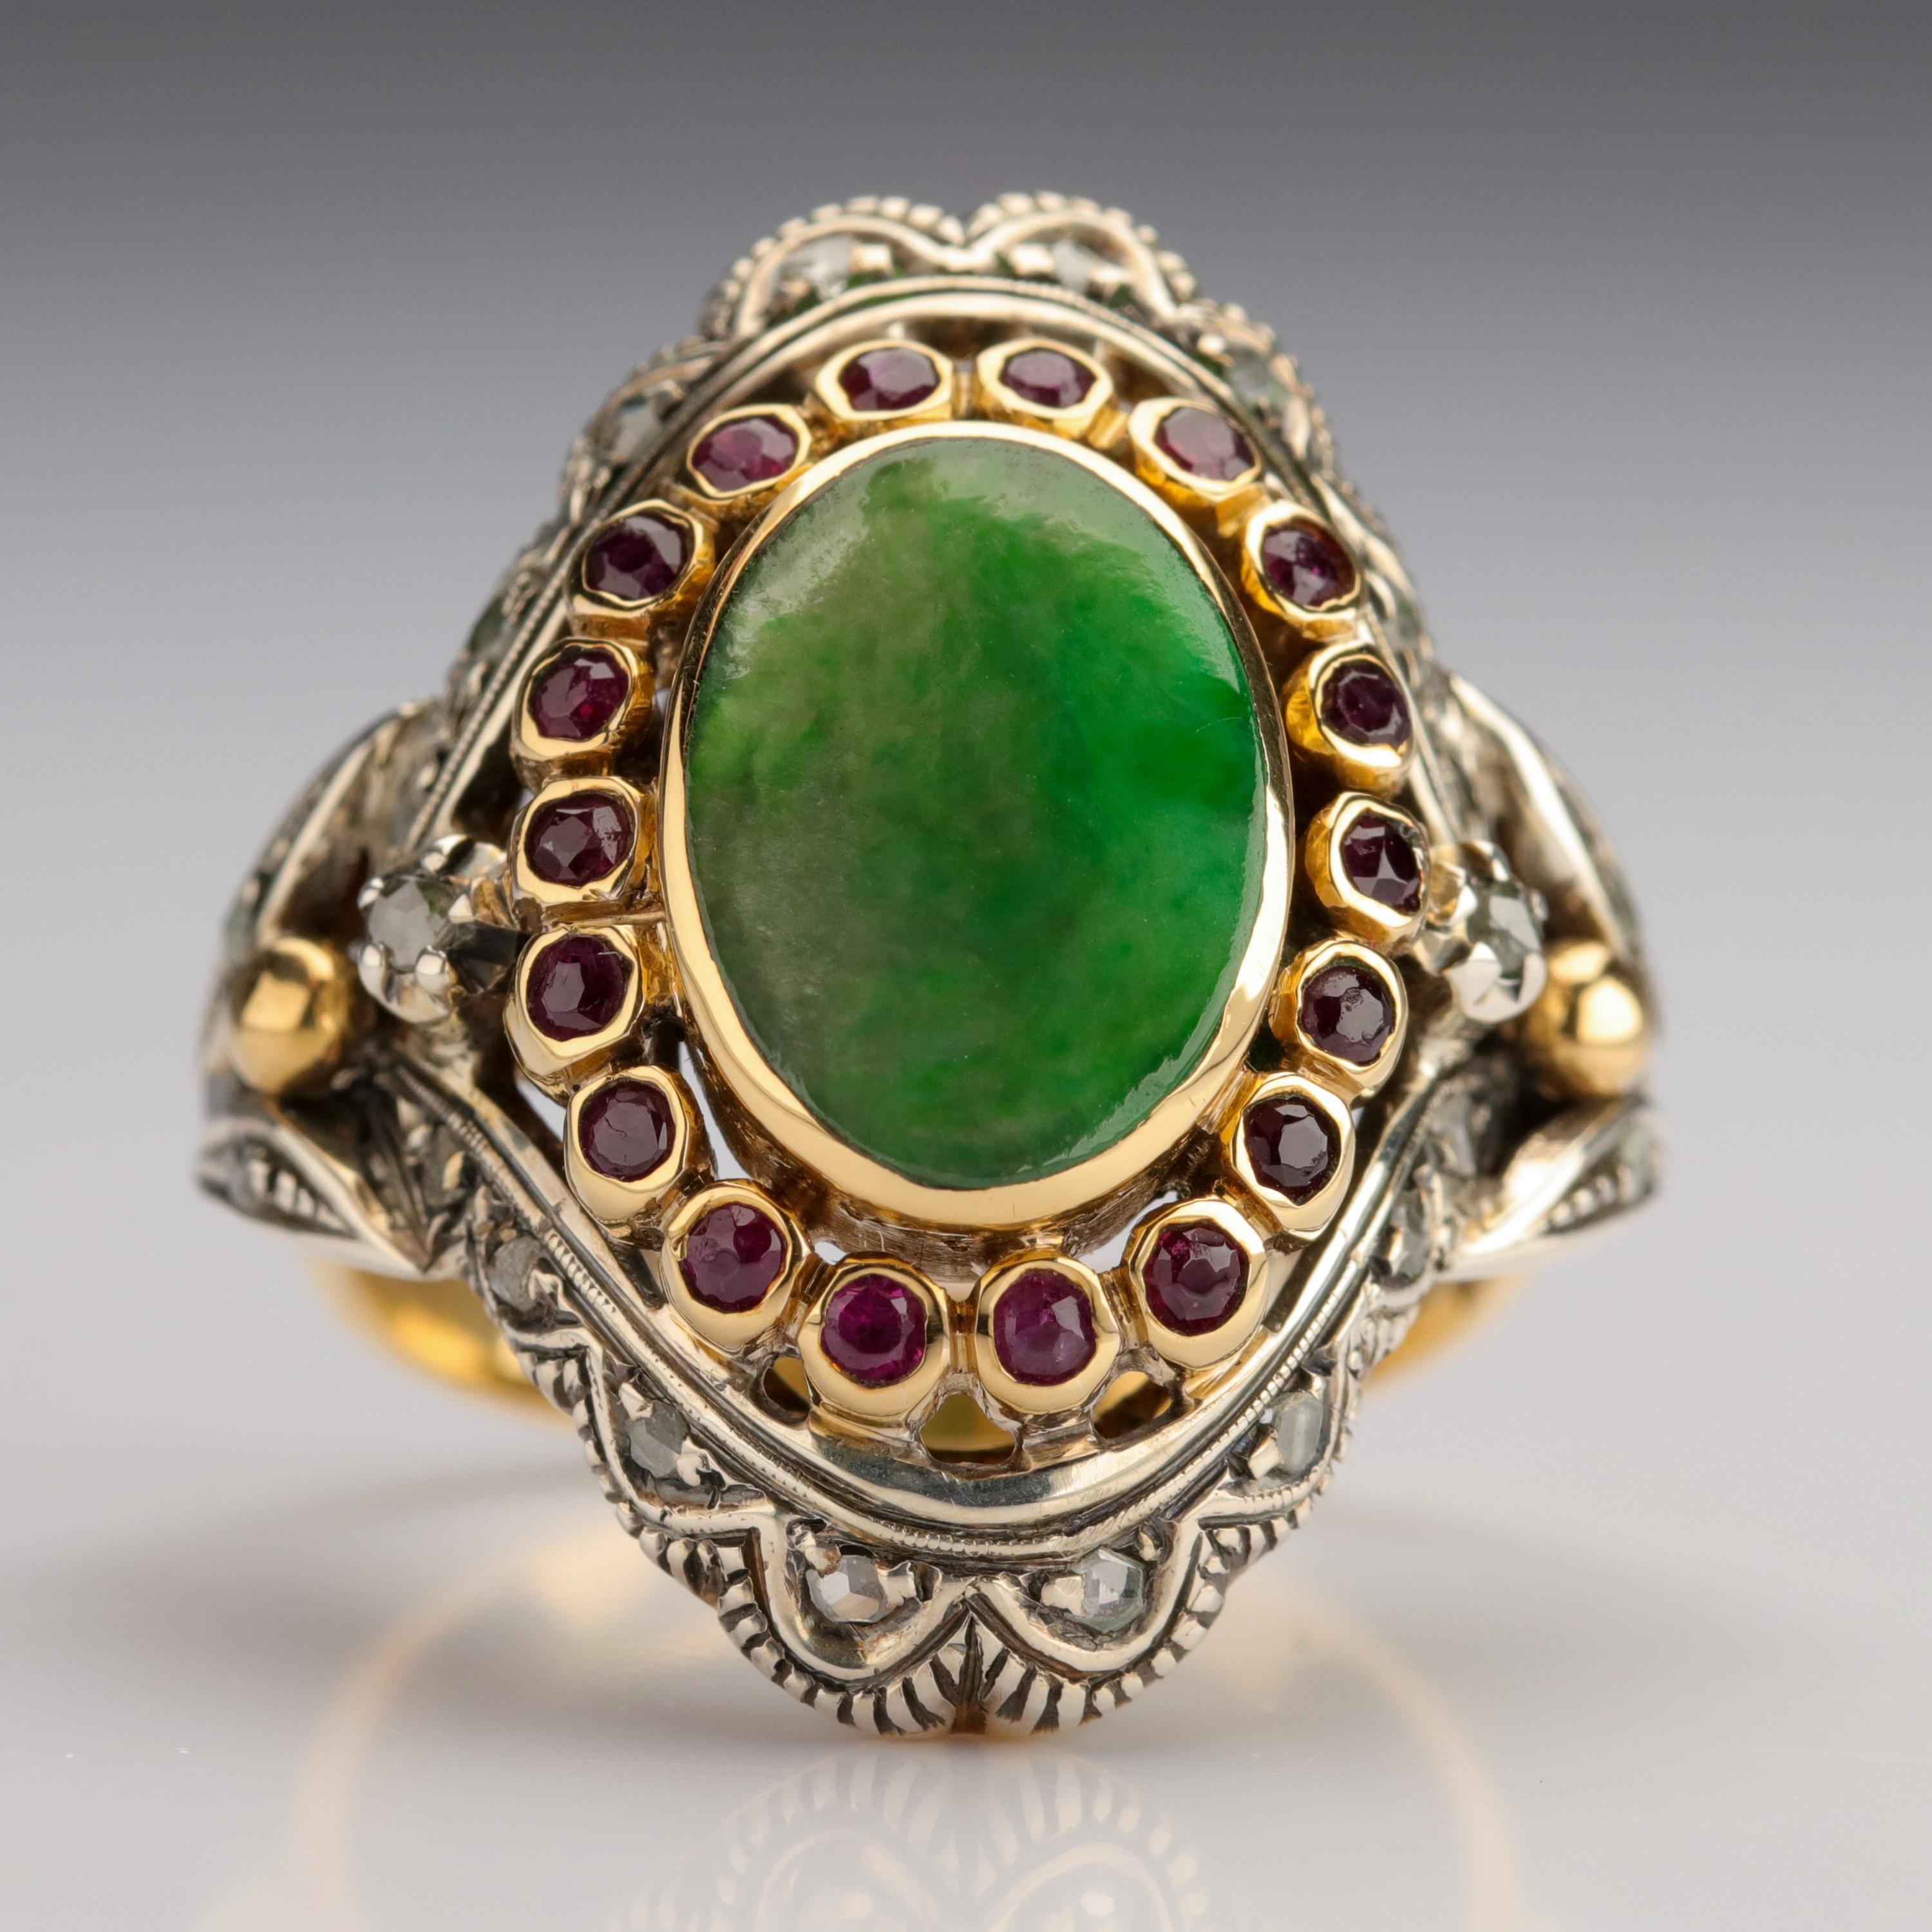 Antique Jade Ring with Rubies & Diamonds in Gold and Silver Eccentric and Ornate 2